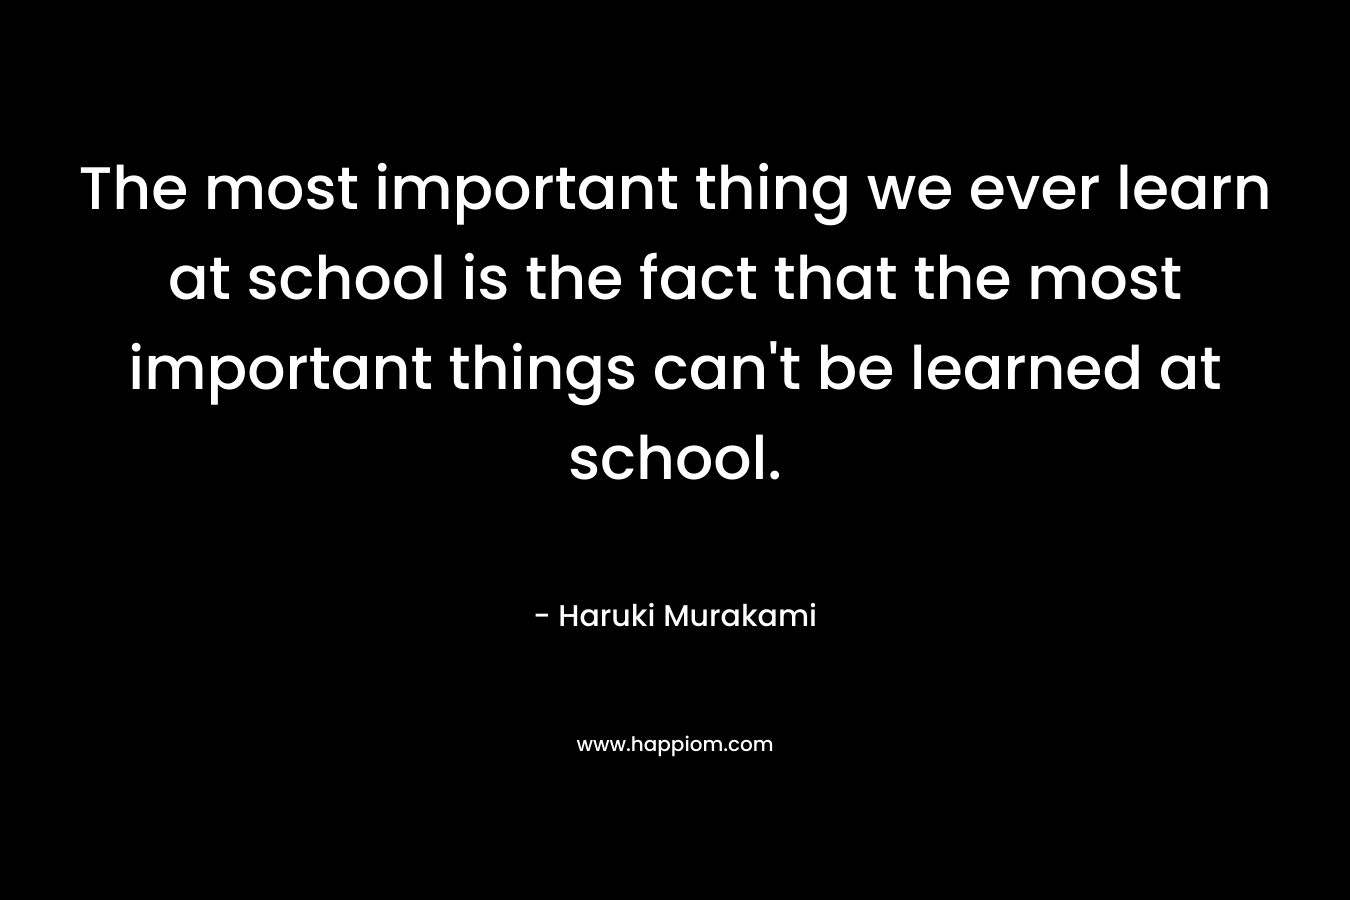 The most important thing we ever learn at school is the fact that the most important things can't be learned at school.